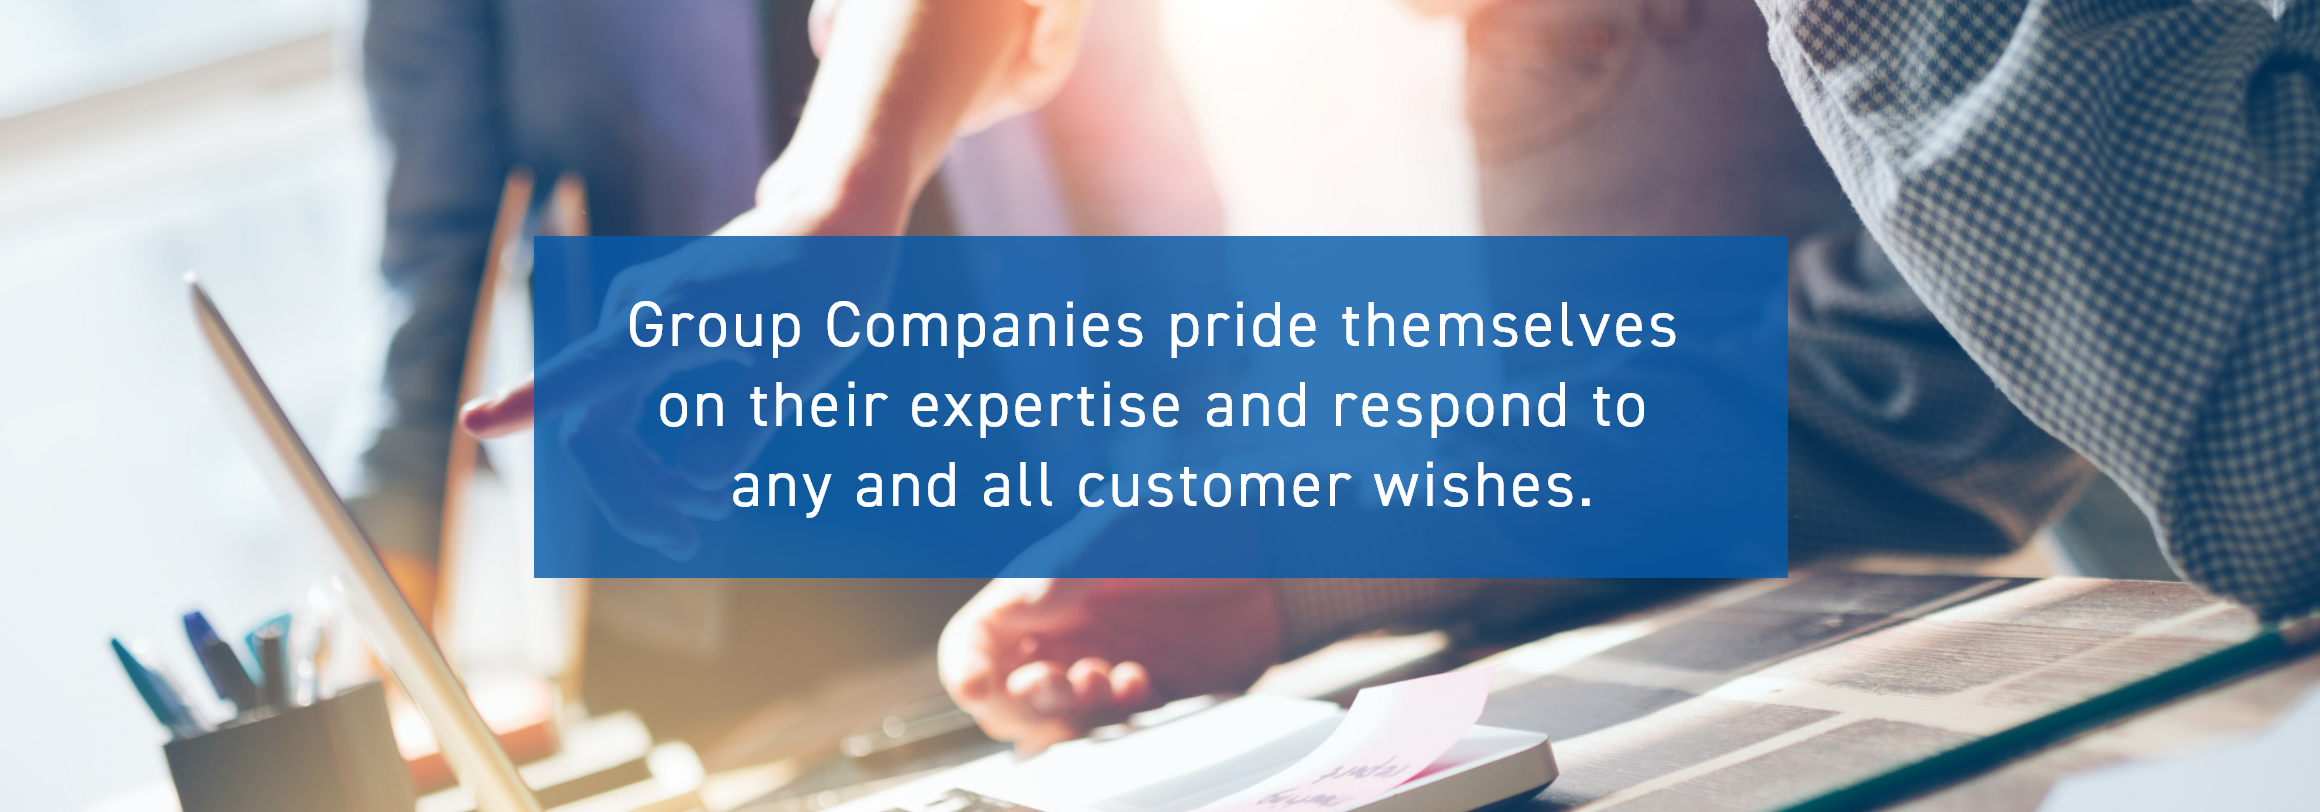 Group Companies pride themselves on their expertise and respond to any and all customer wishes.